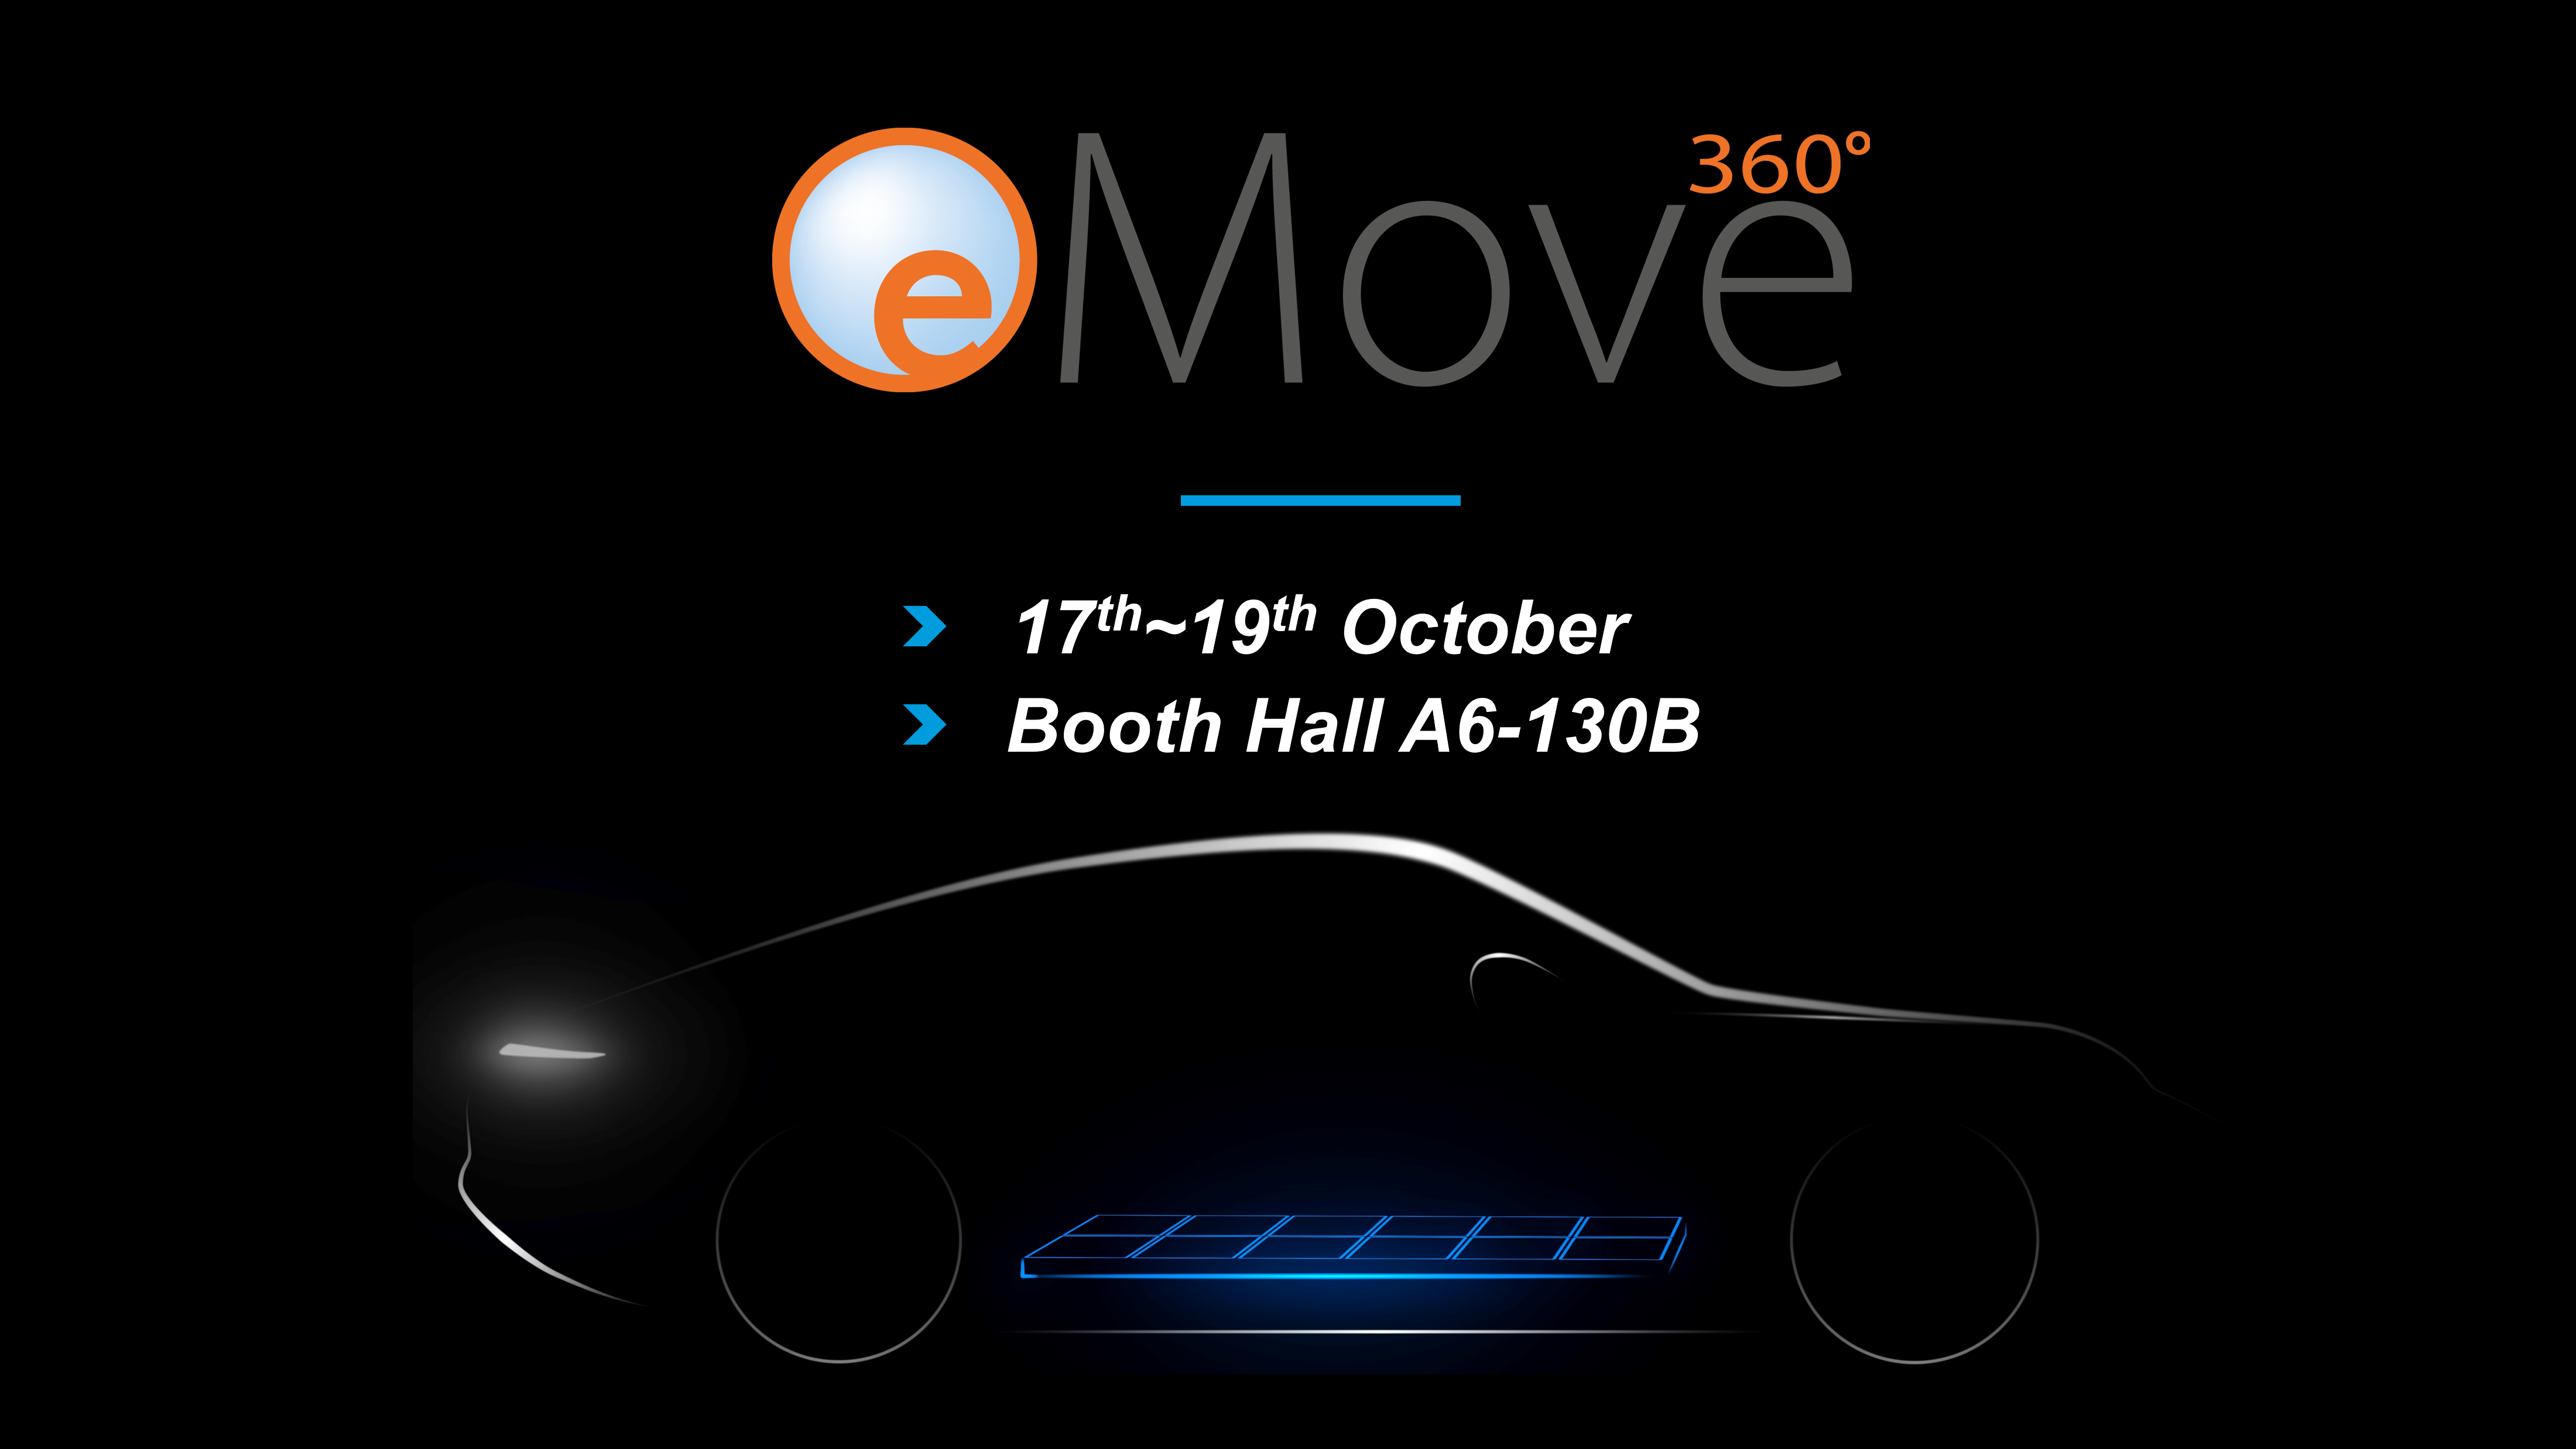 Visit XING Mobility at eMove360° in Oct 17th-19th